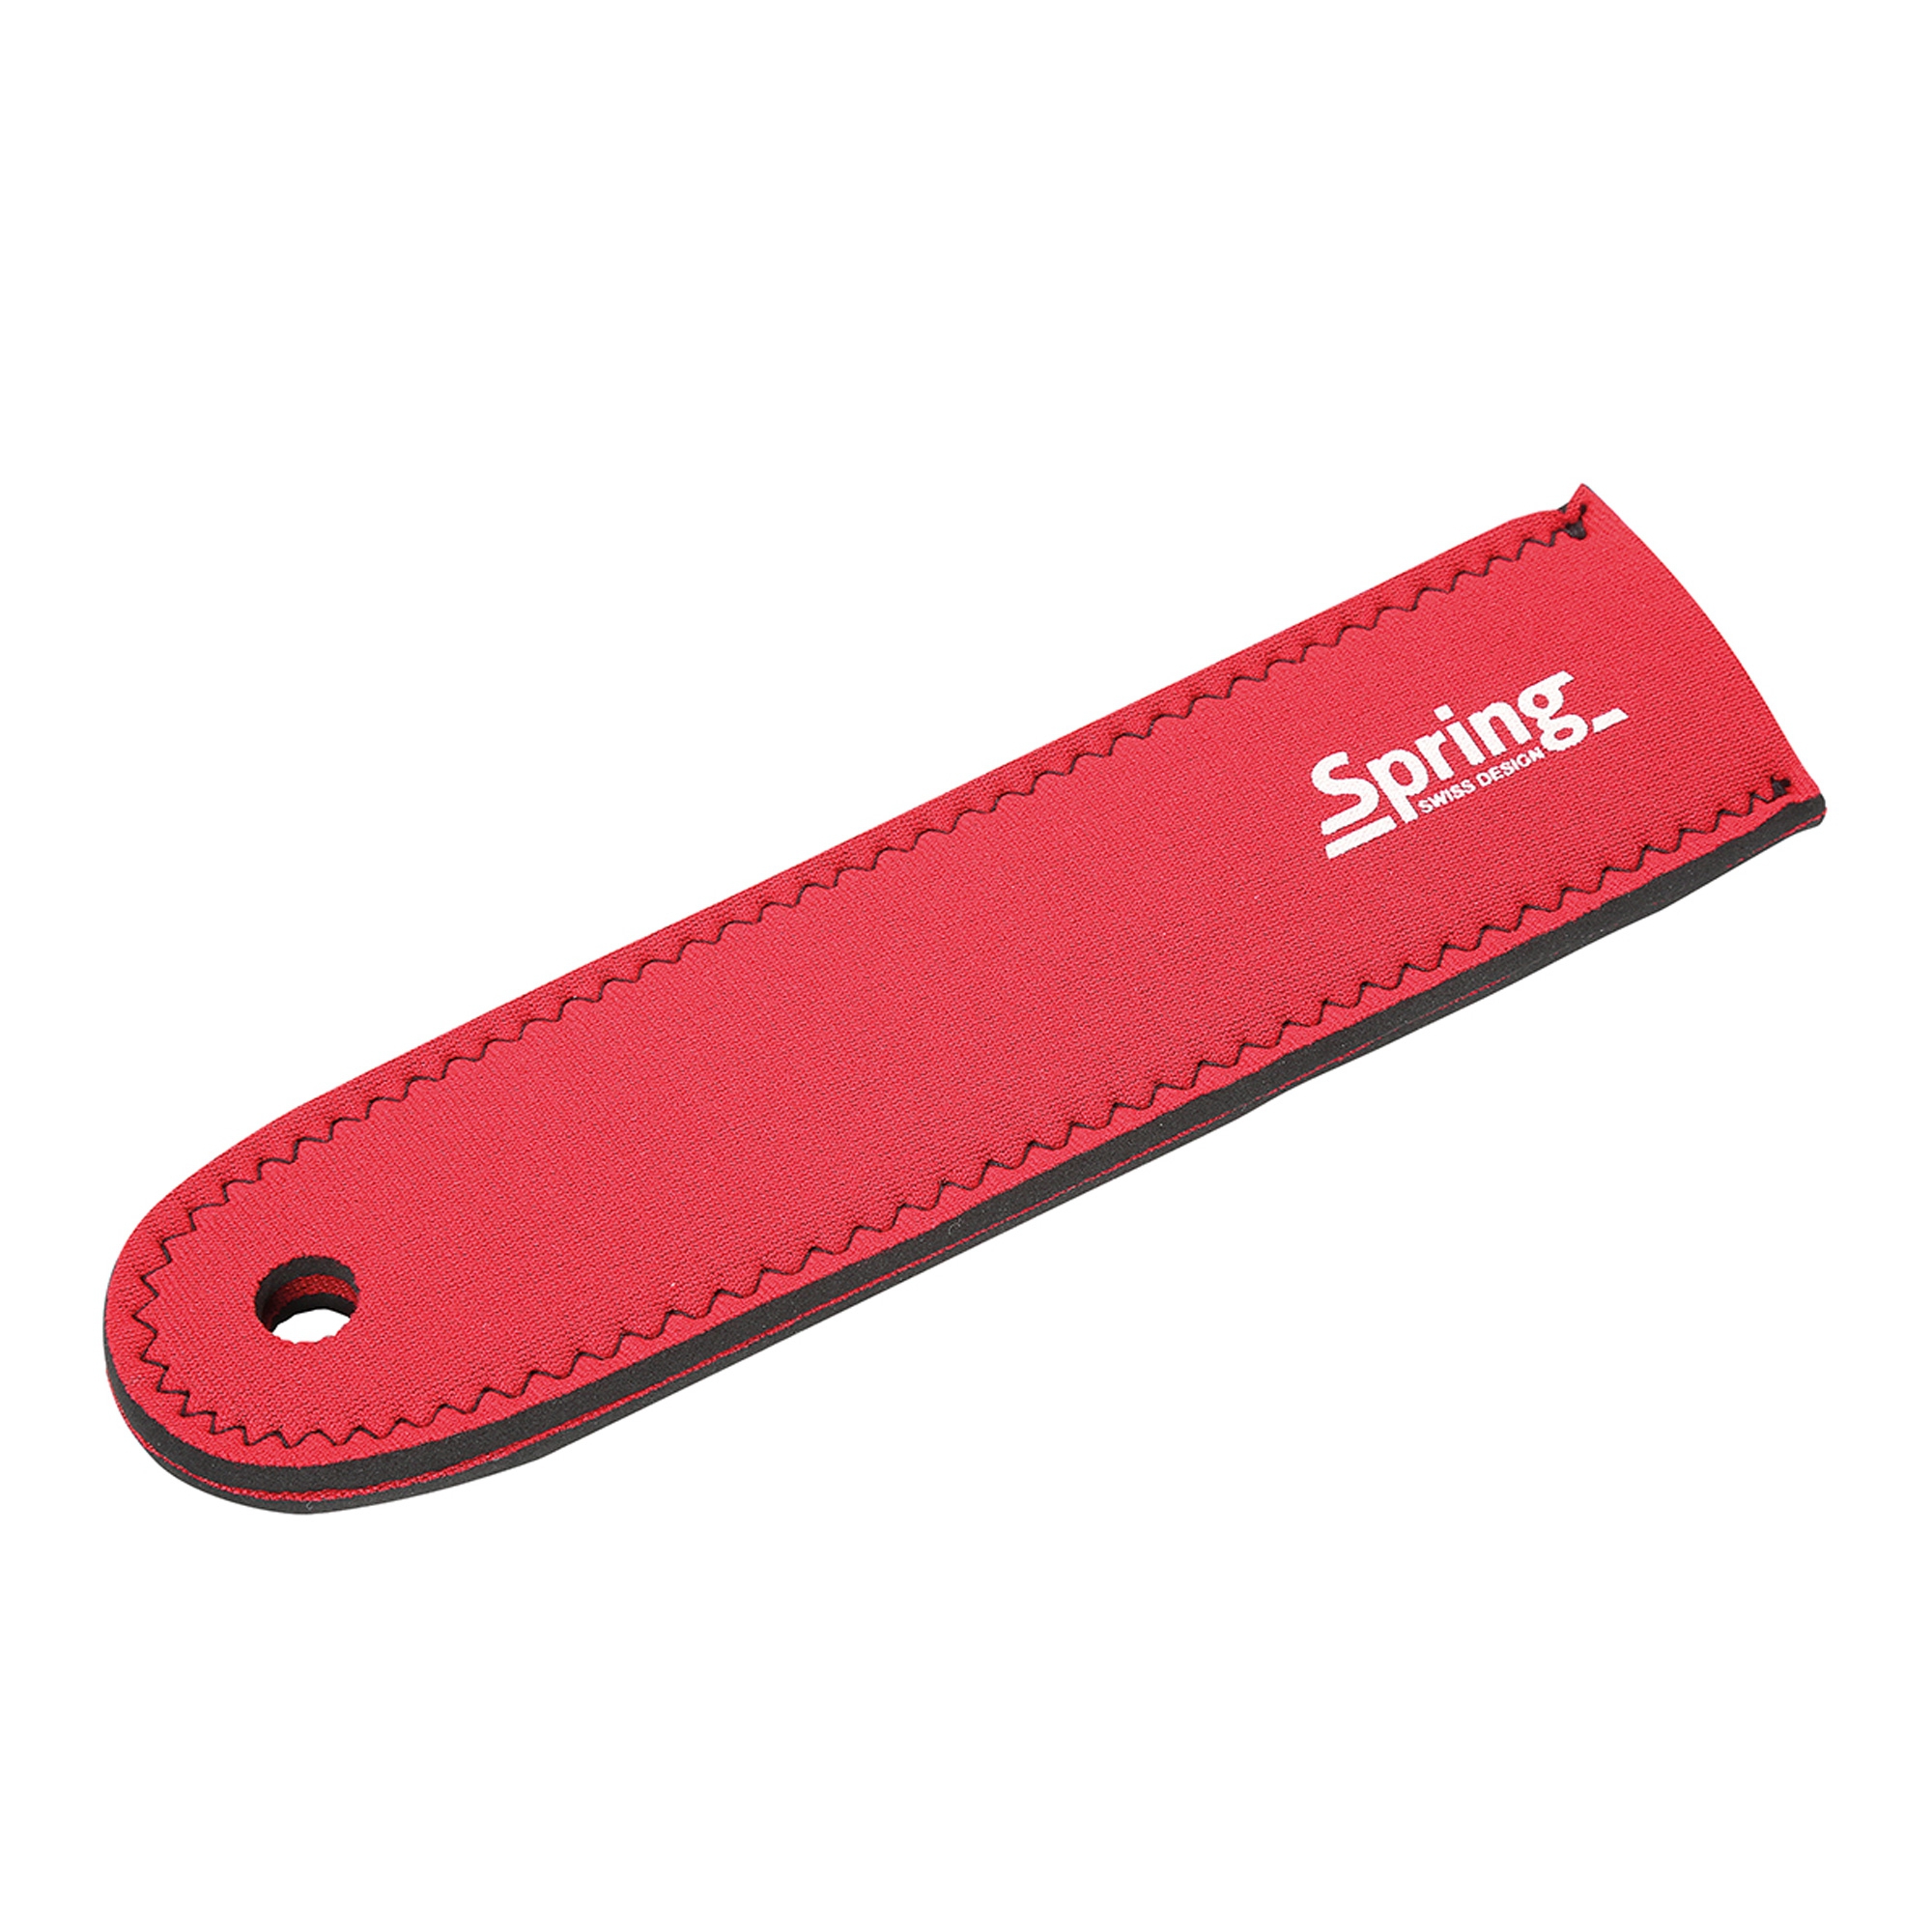 Spring - Pan handle protector - Red